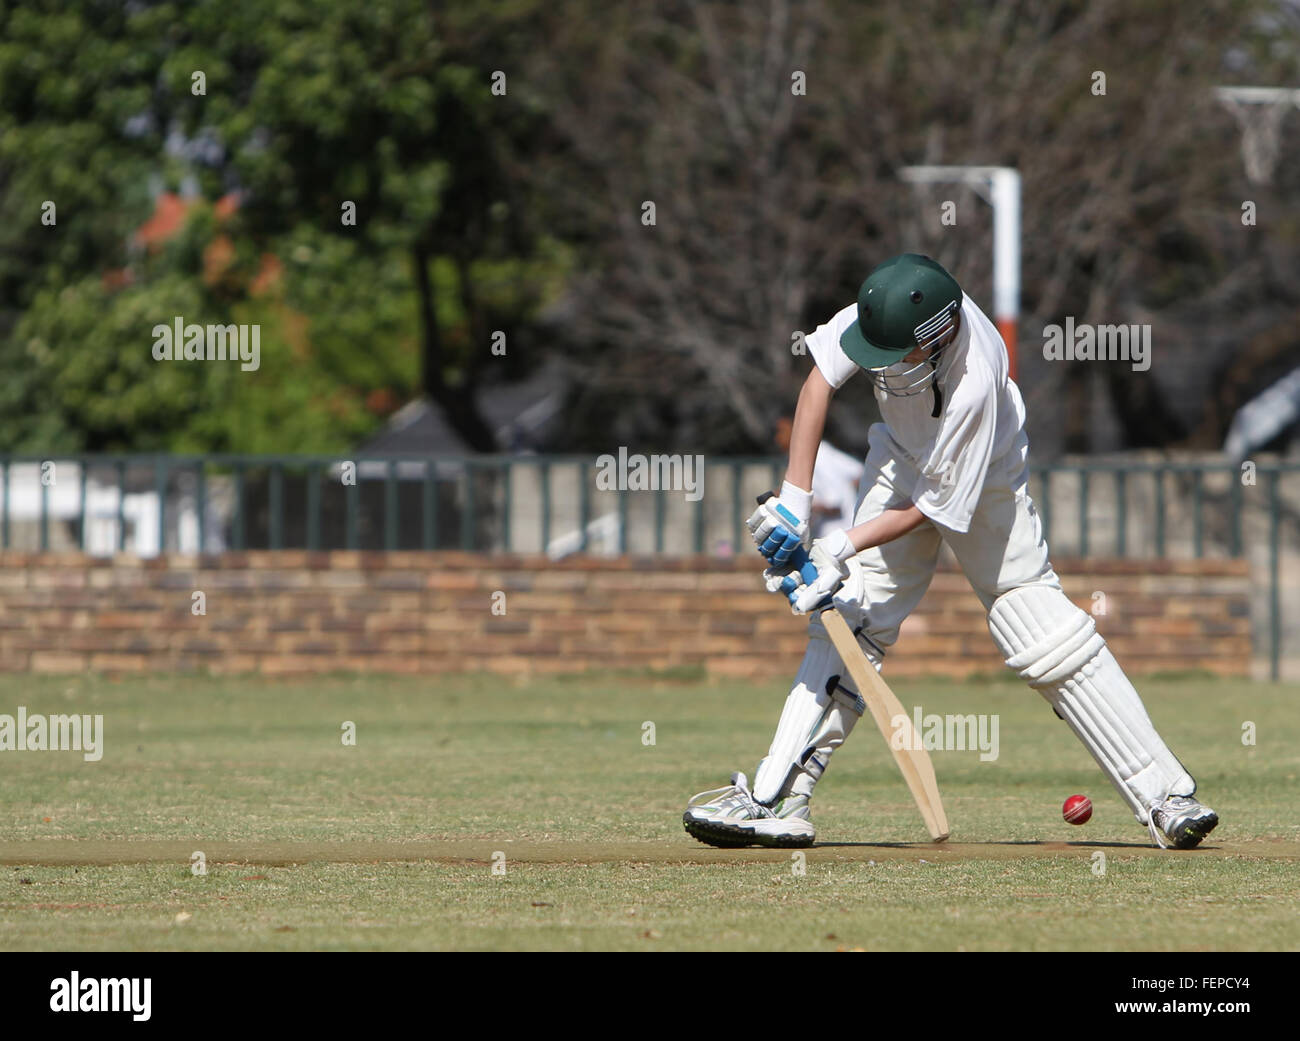 A schoolboy tries to block a cricket ball and prevent it from hitting his wickets. He is defensive mode but misses. Stock Photo